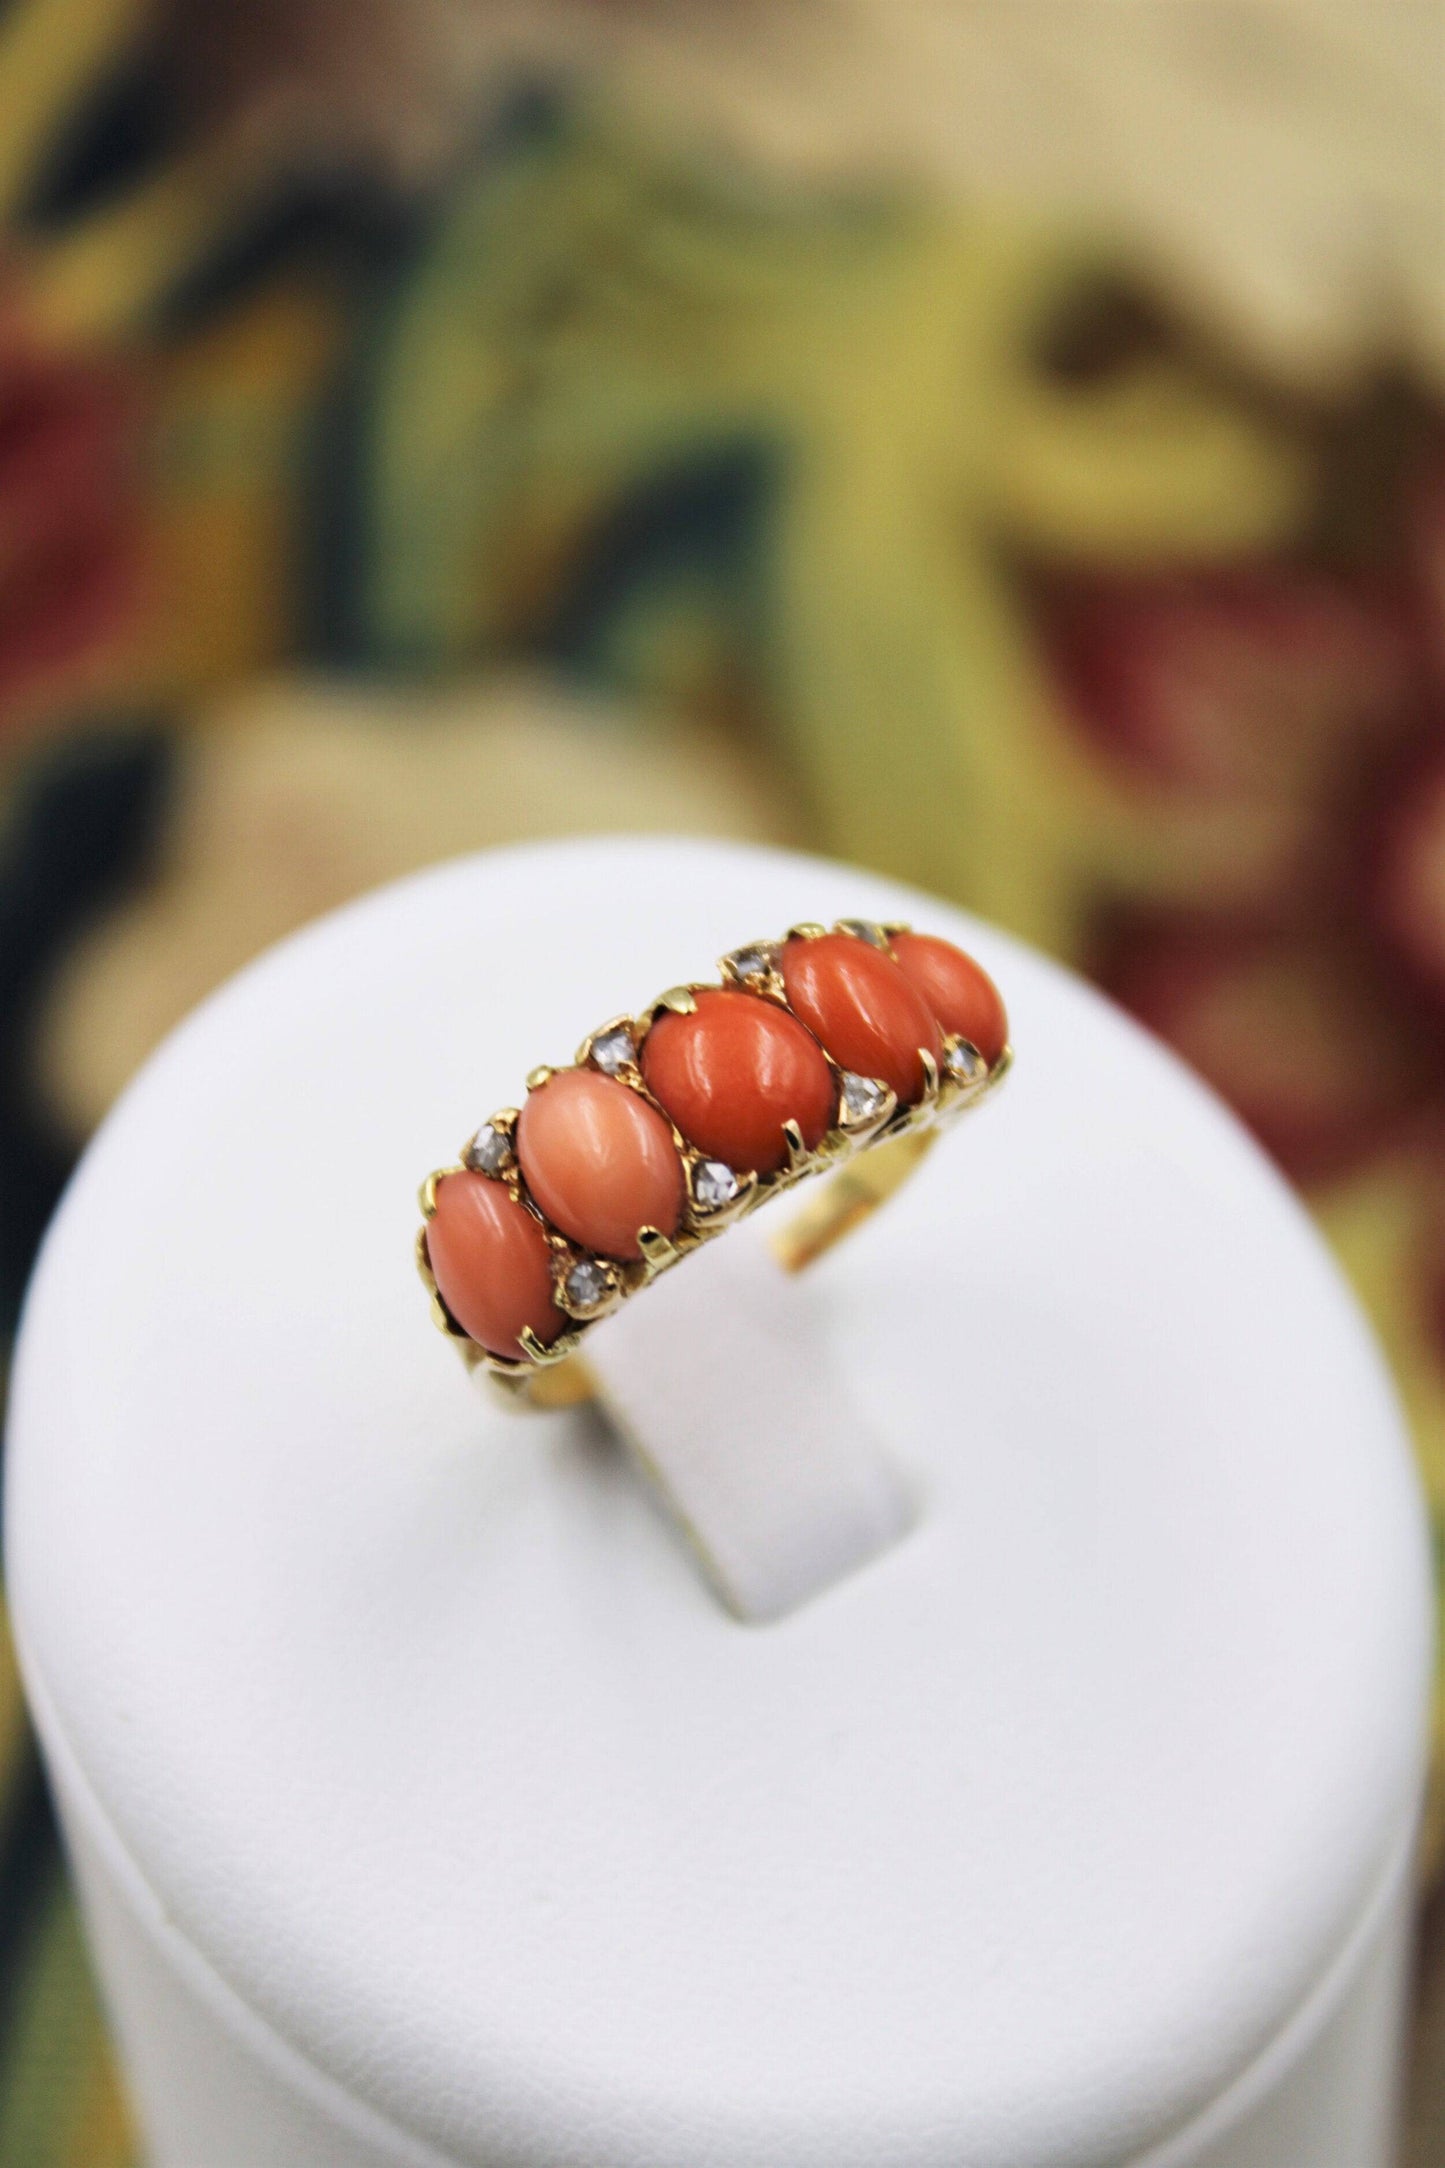 A very fine Victorian Coral and Diamond Ring set in 18ct Yellow Gold, English, Circa 1900 - Robin Haydock Antiques